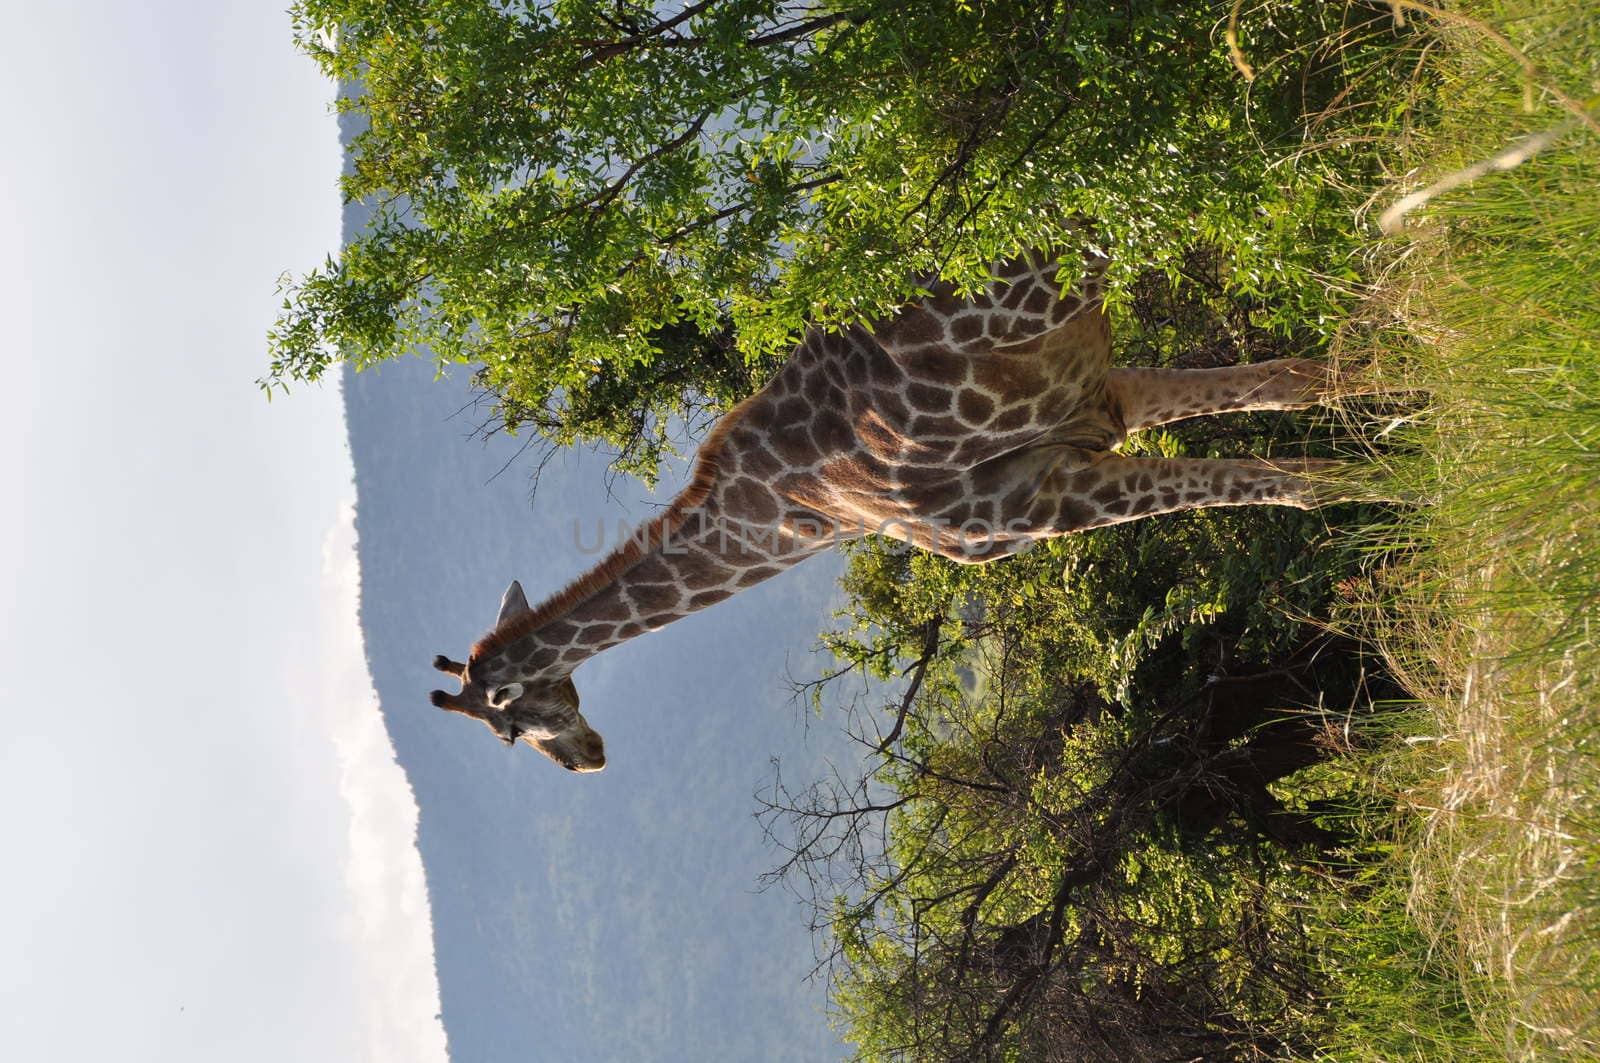 Giraffe looks out from the trees in the bush with mountains in the background